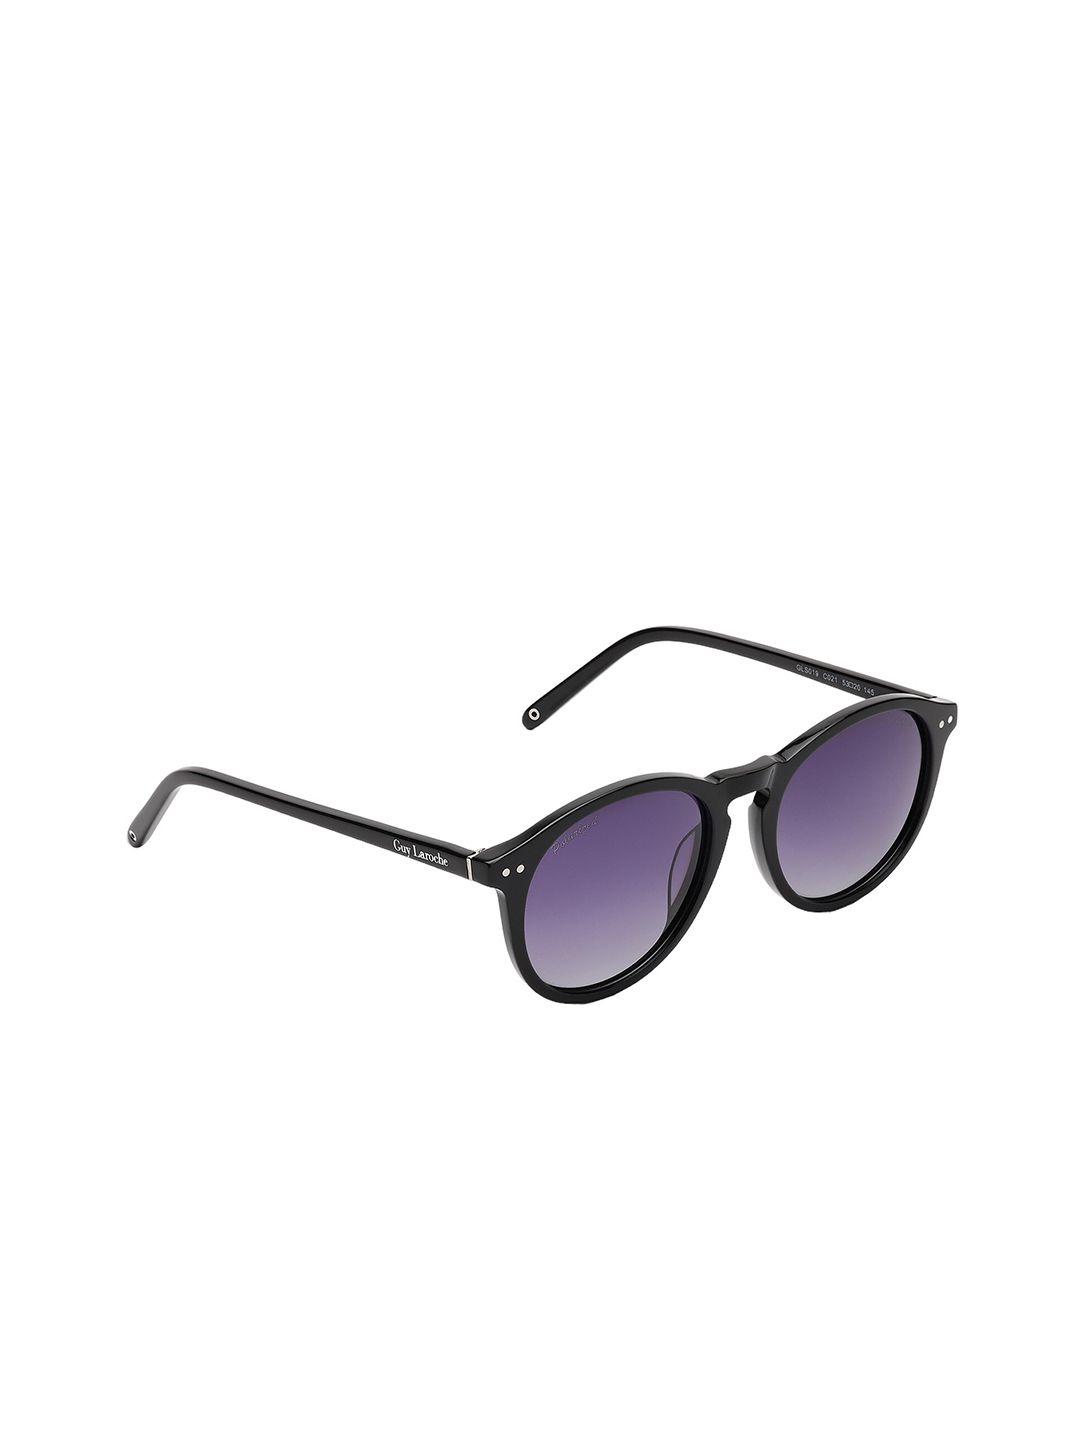 guy laroche unisex oval sunglasses with uv protected lens